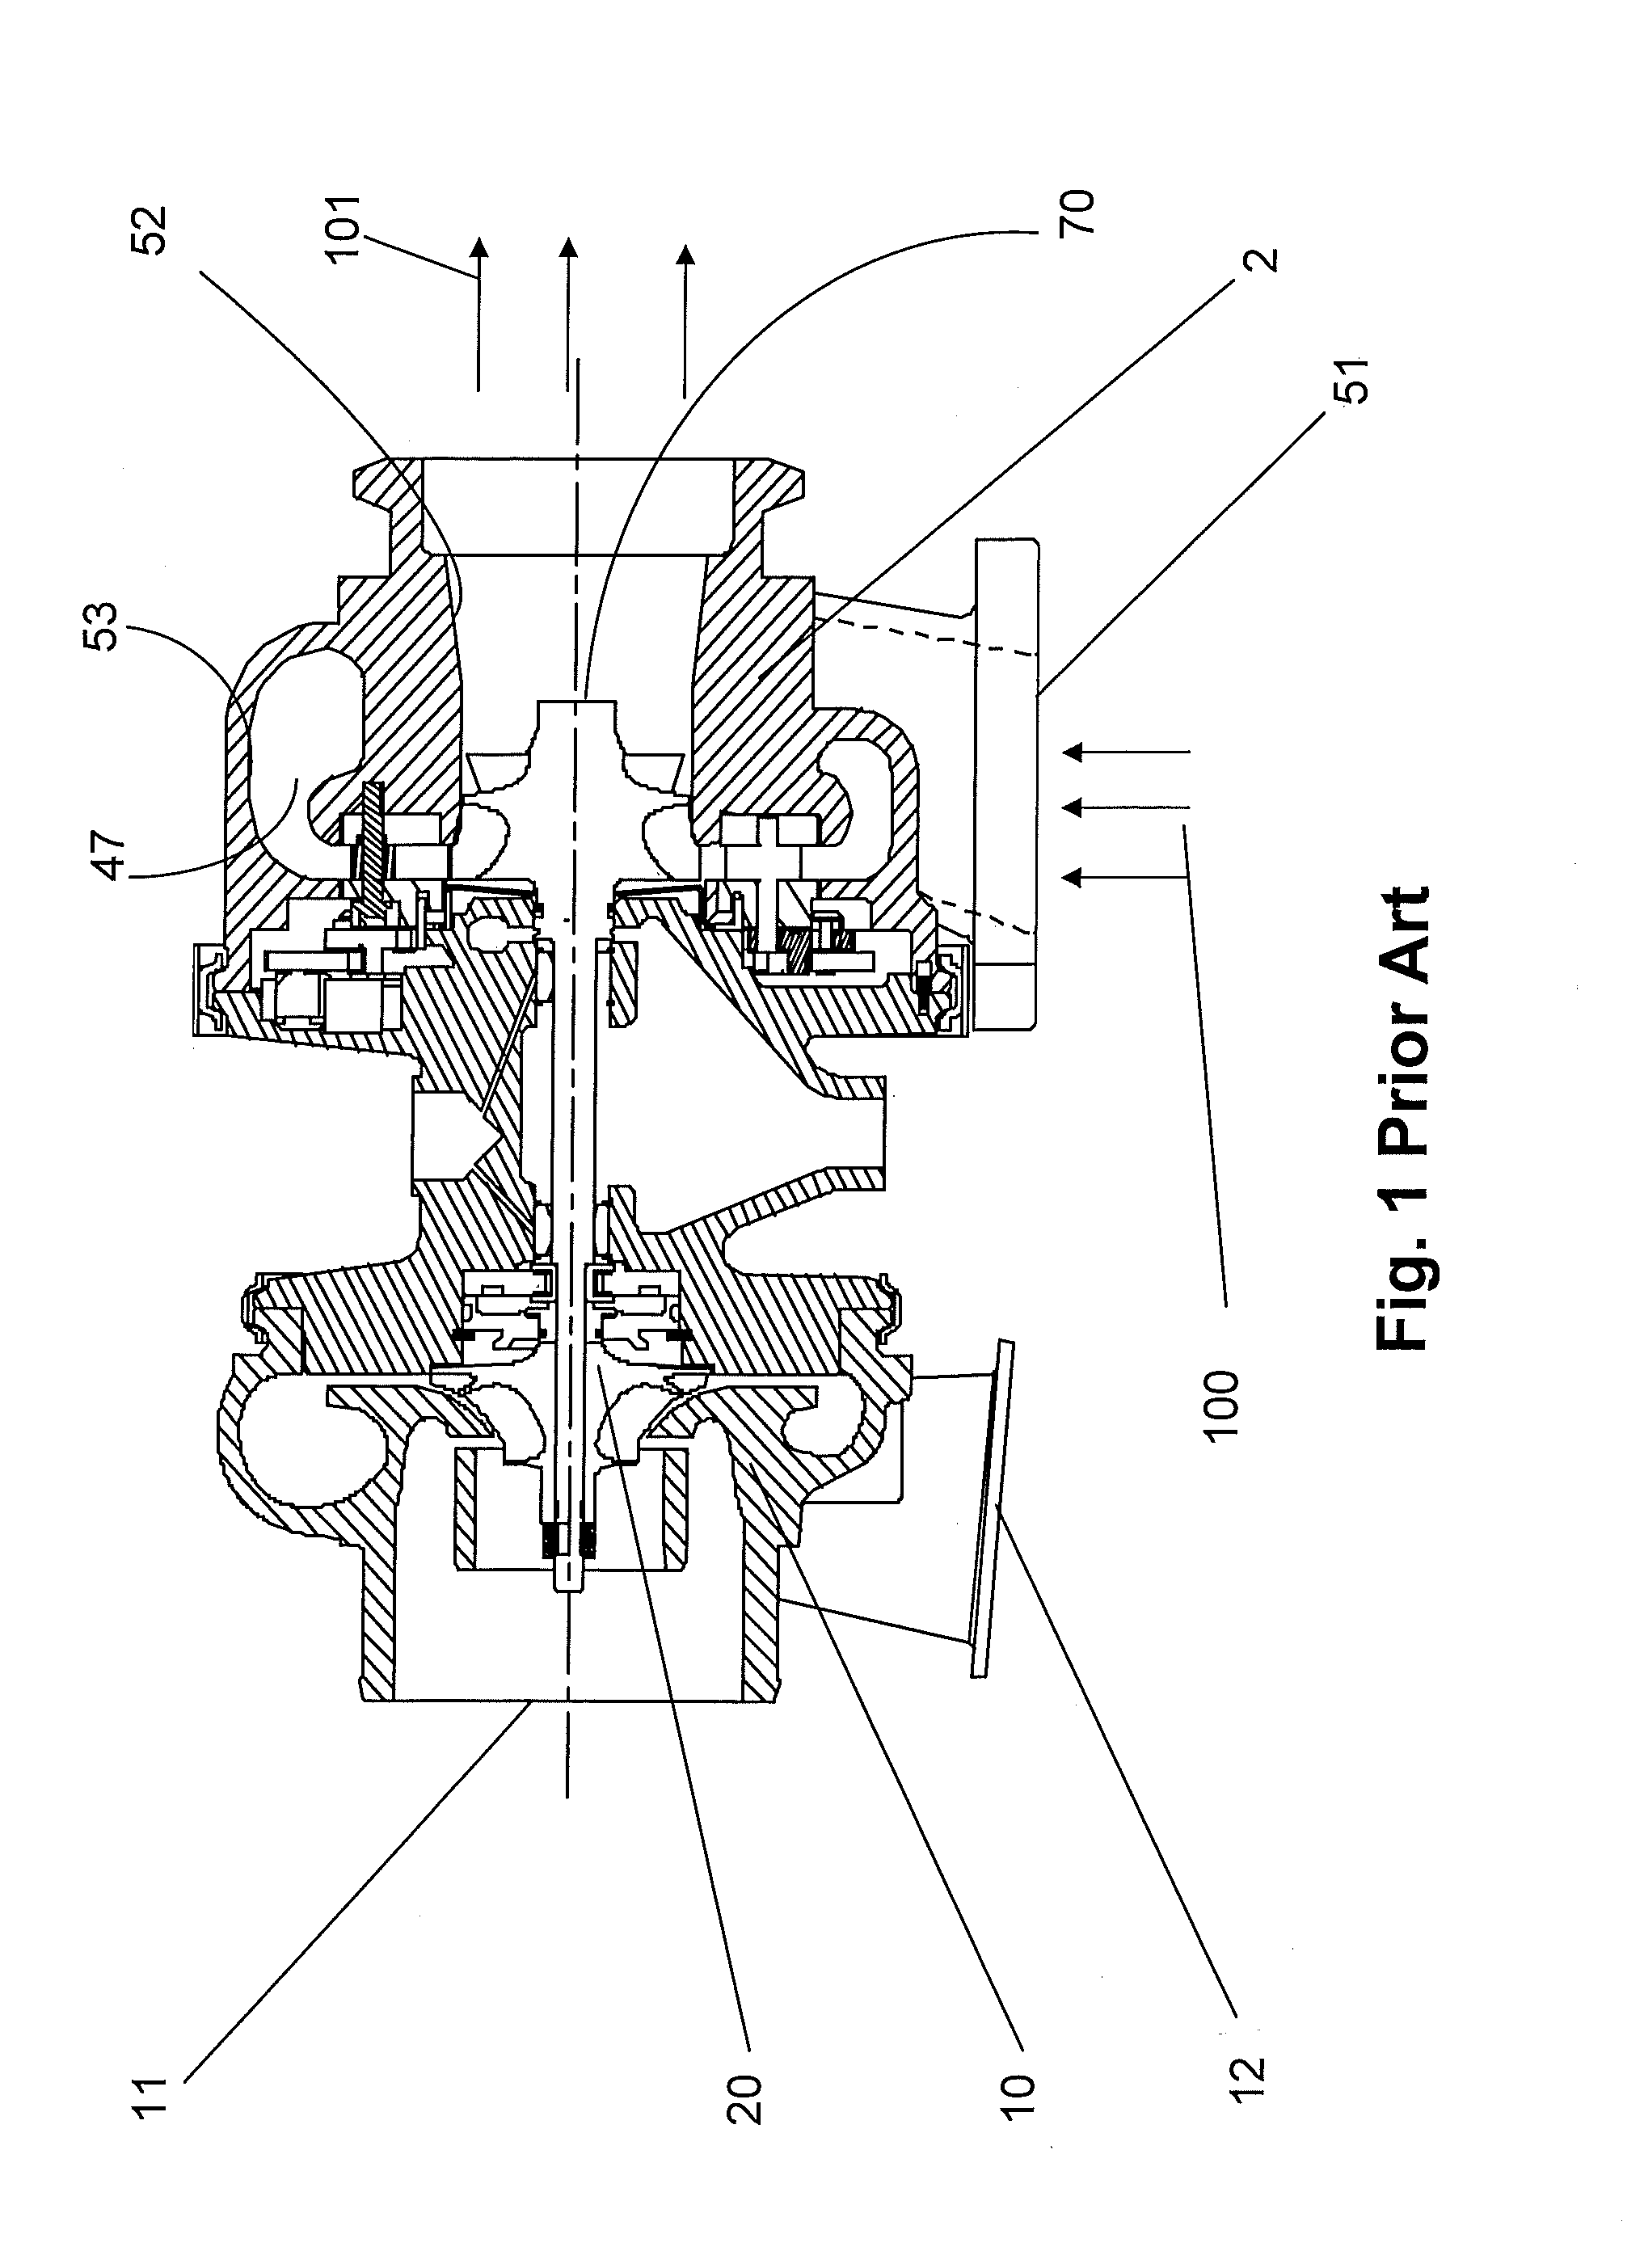 Simplified variable geometry turbocharger with increased flow range